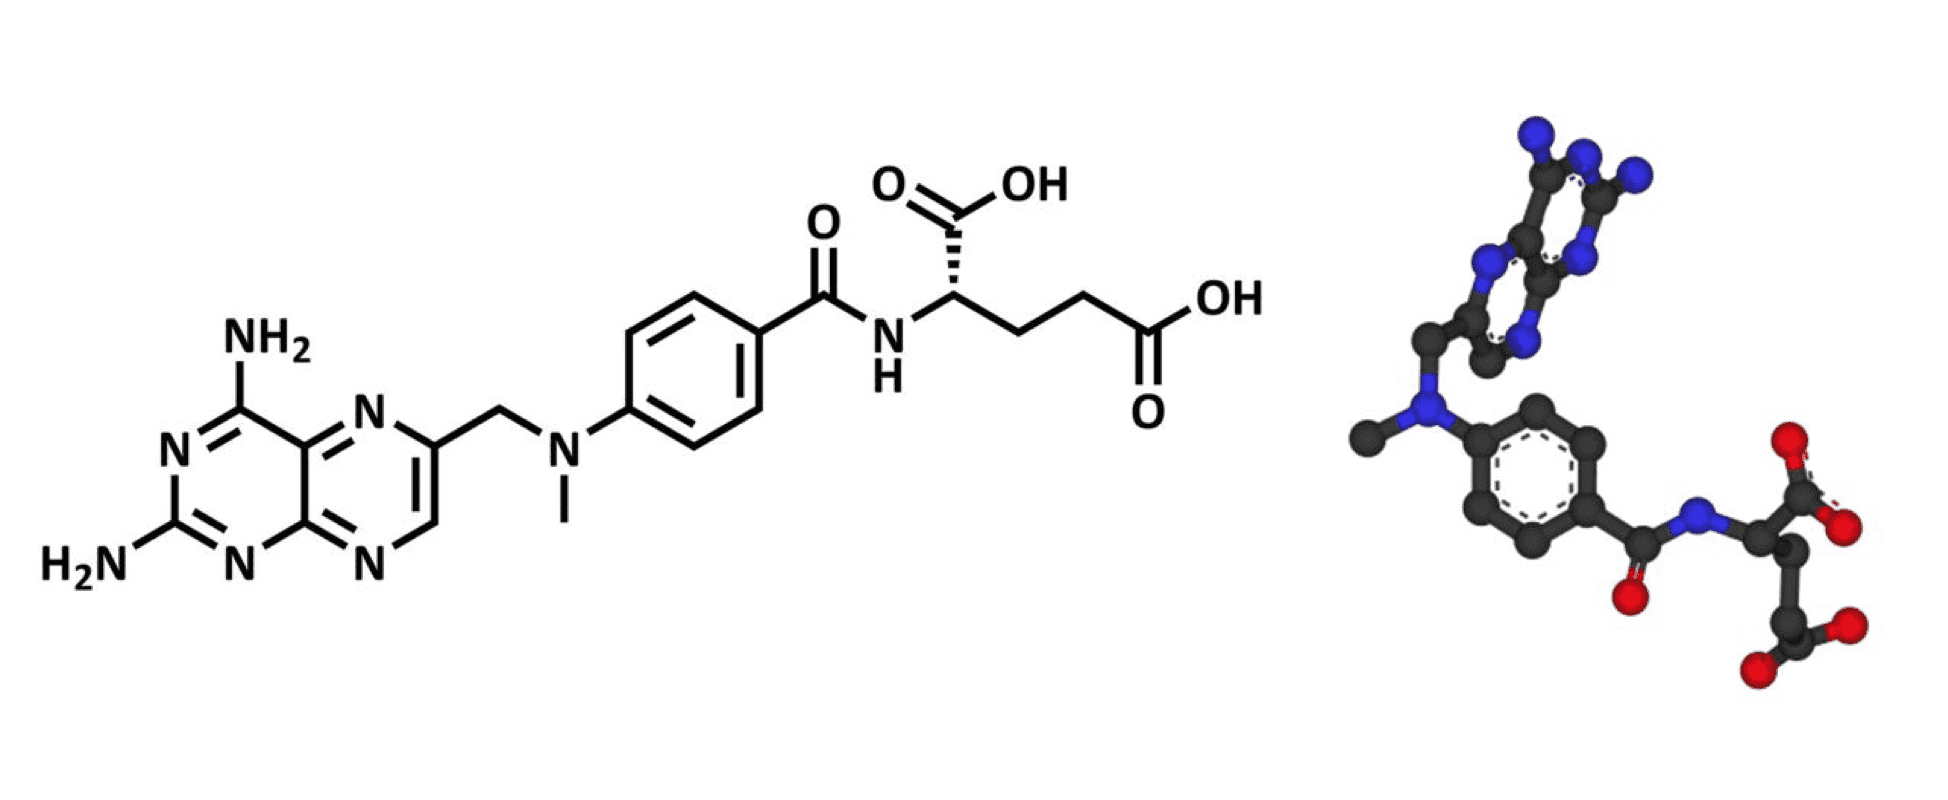  Chemical structure of the MTX. MTX is a  folate analogue commonly used to treat RA, but it also exhibits potent antitumor  activity (Expert Opin Drug Del, 2012).